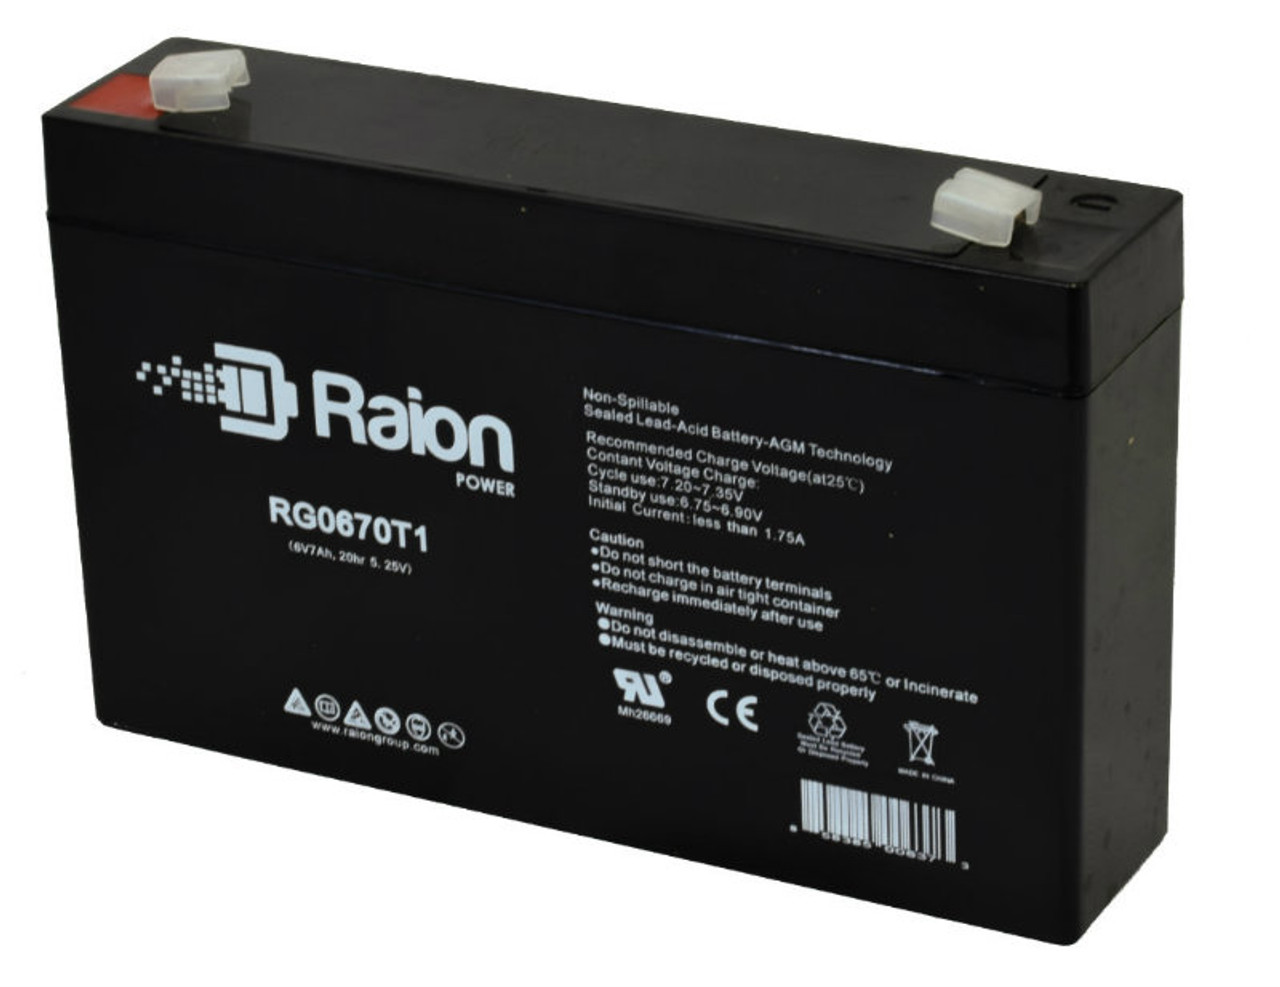 Raion Power RG0670T1 Replacement Battery for Ultracell UL7.2-6 OEM Battery